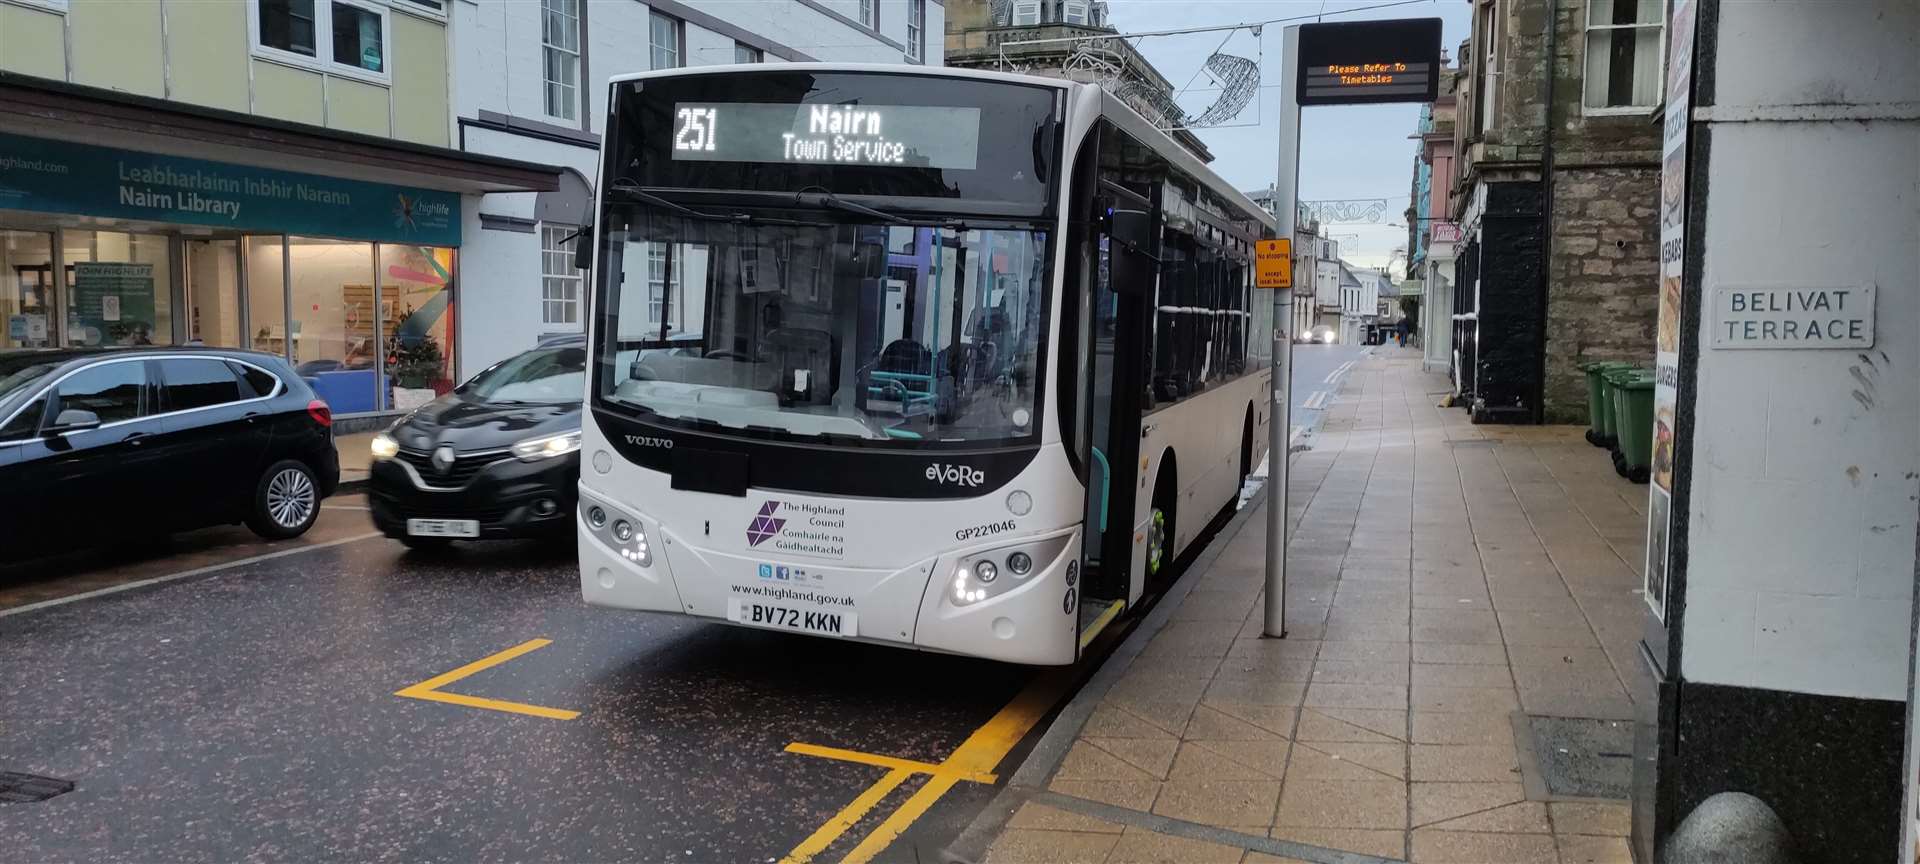 Highland Council has started running its own buses.